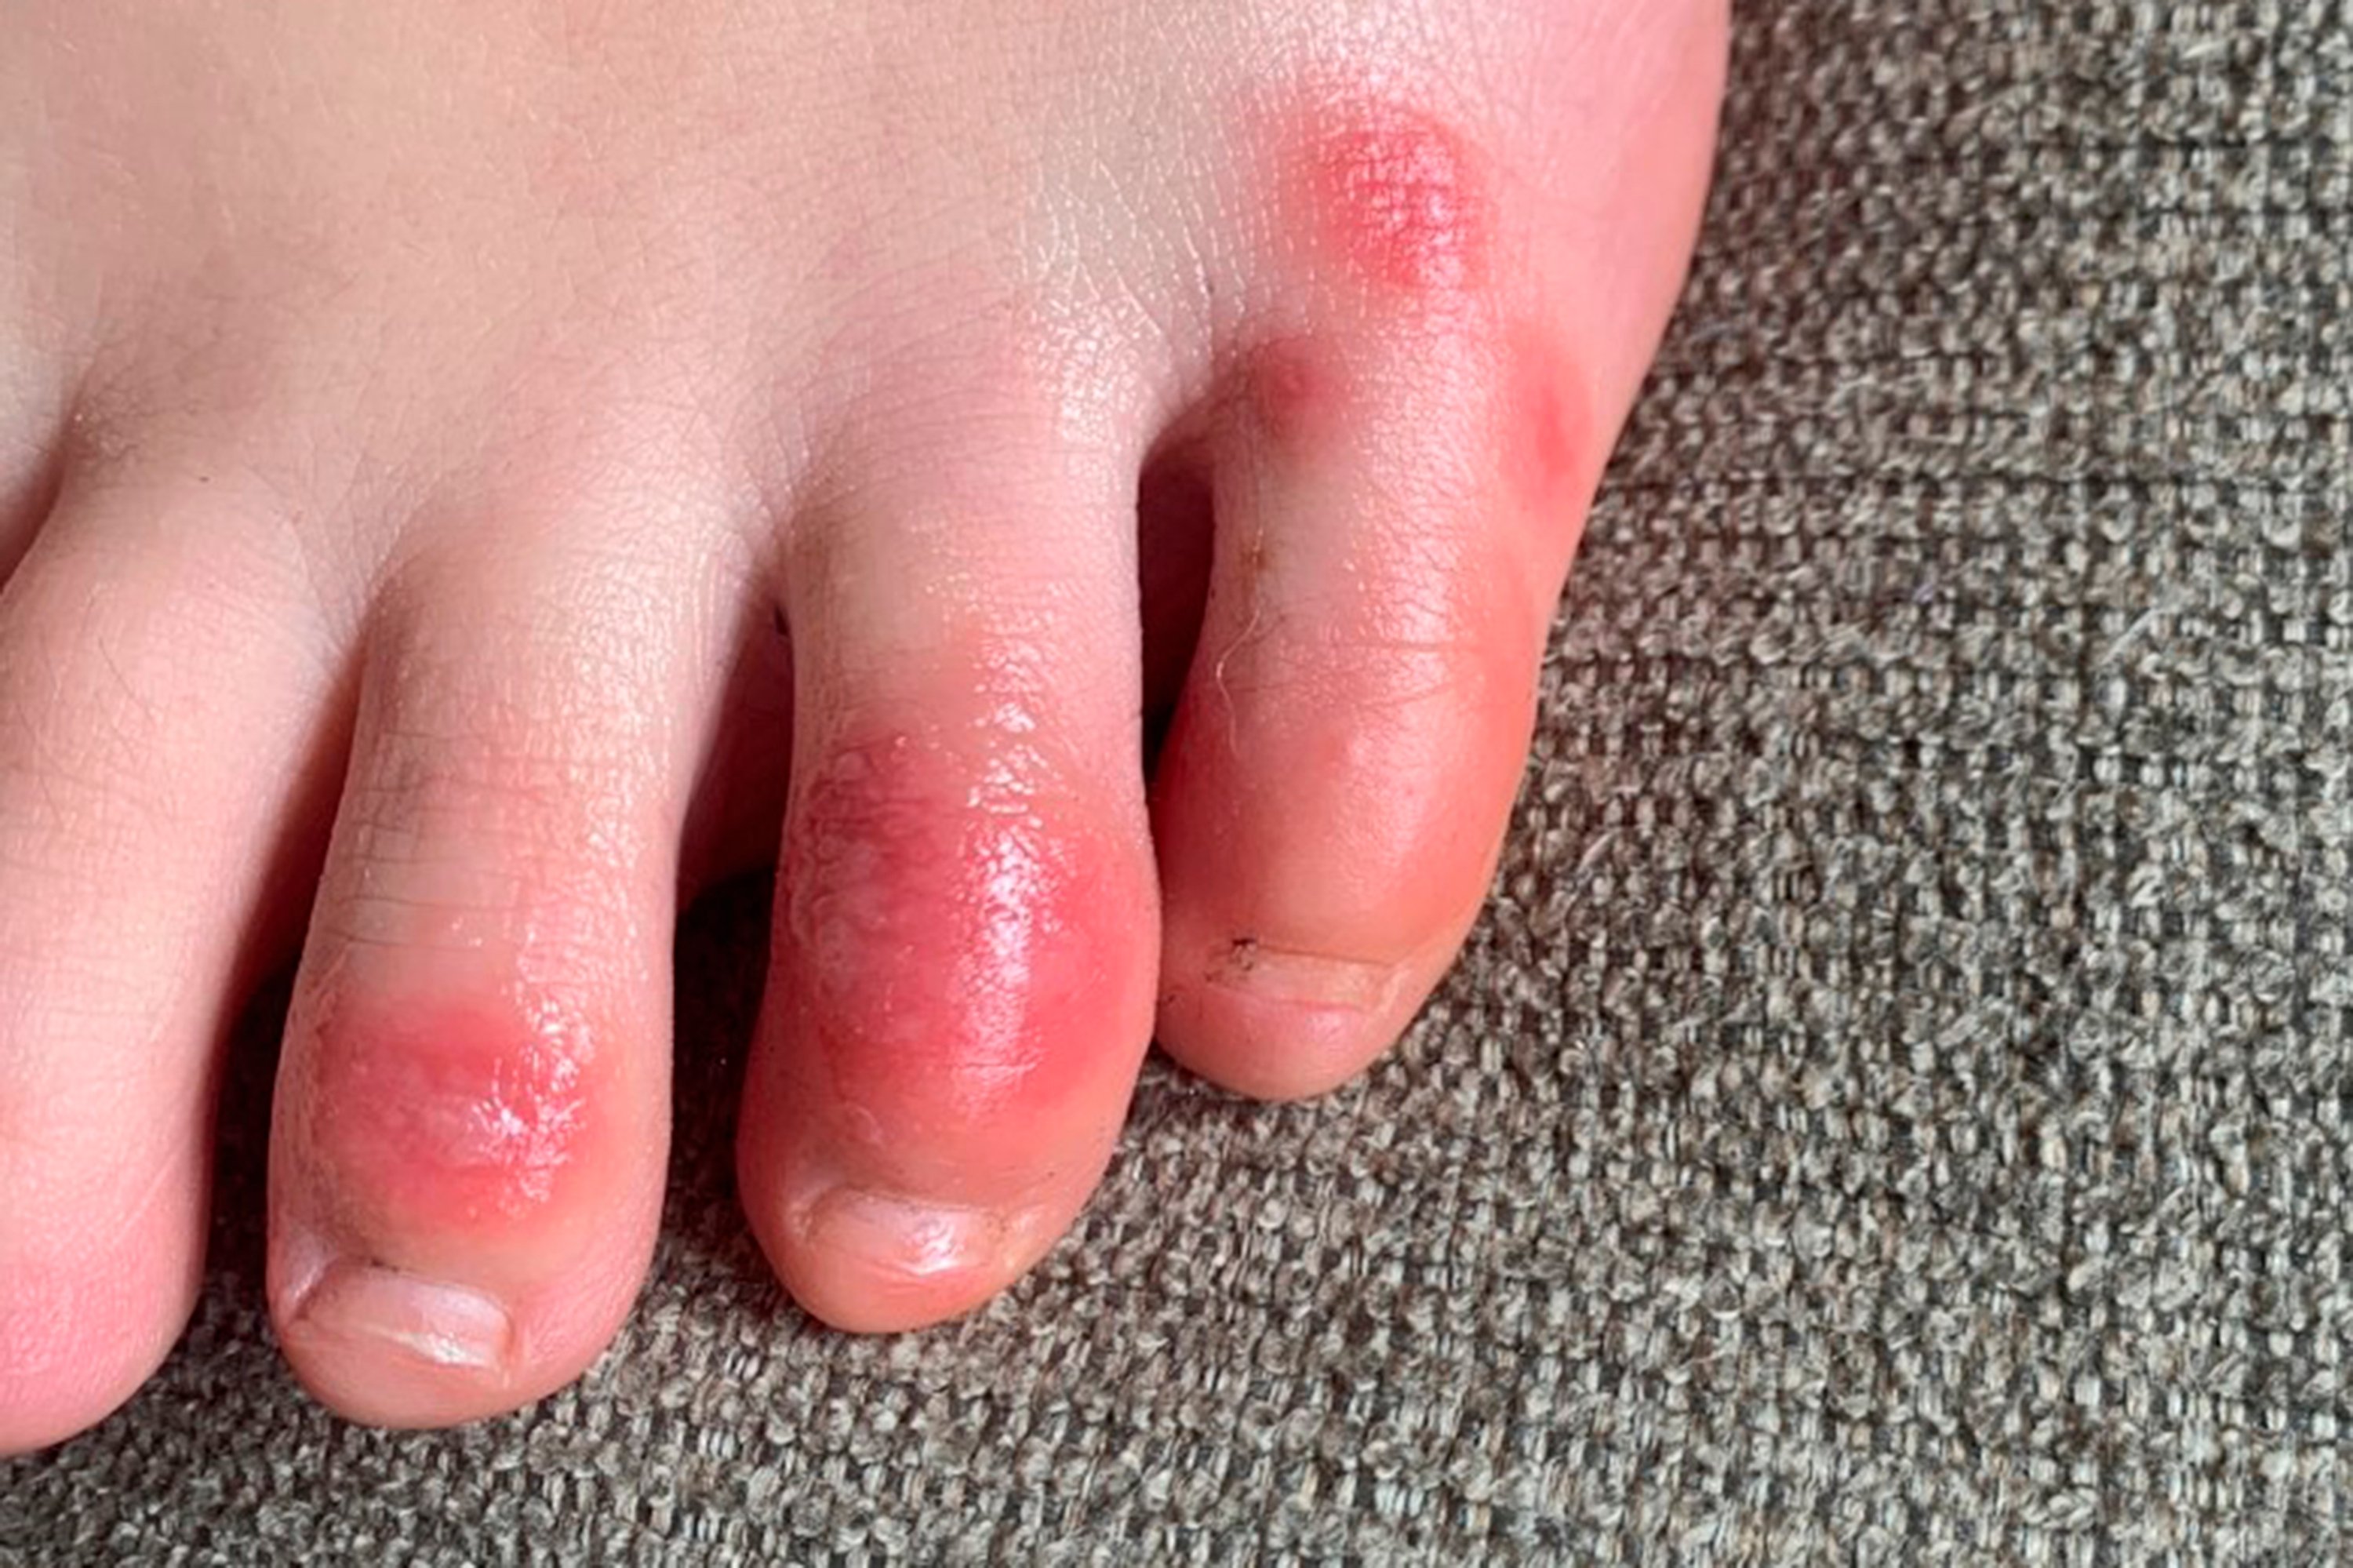 This photo provided by Northwestern University shows discoloration on a teenage patient